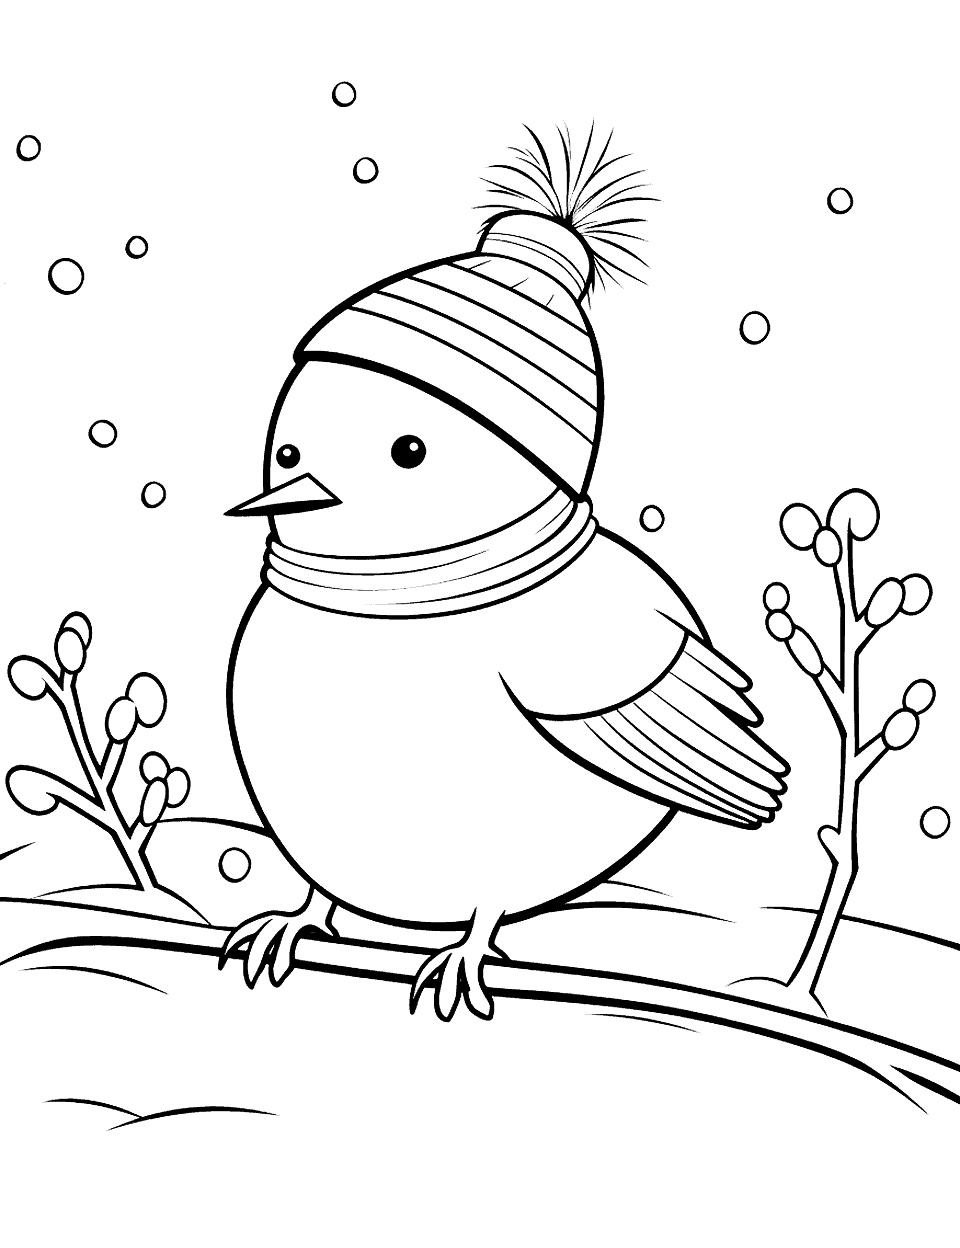 Simple Winter Bird Coloring Page - A large, simple image of a bird in winter.